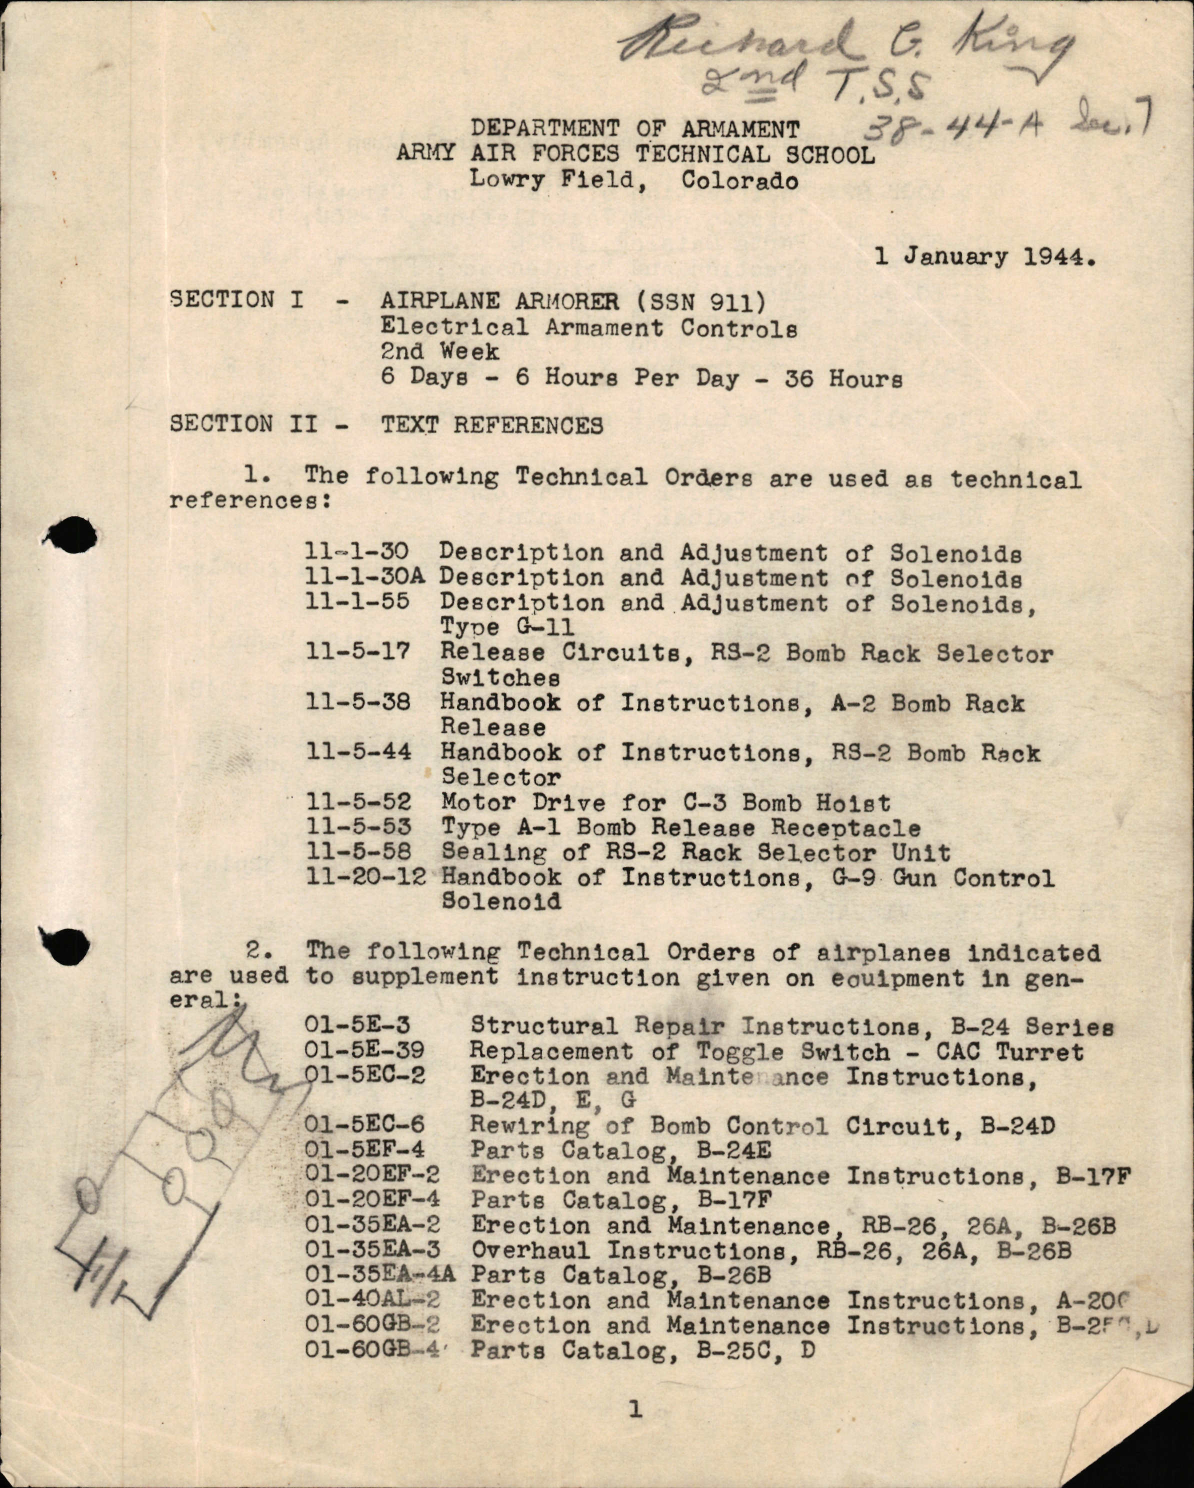 Sample page 1 from AirCorps Library document: Airplane Armorer - Electrical Armament Controls